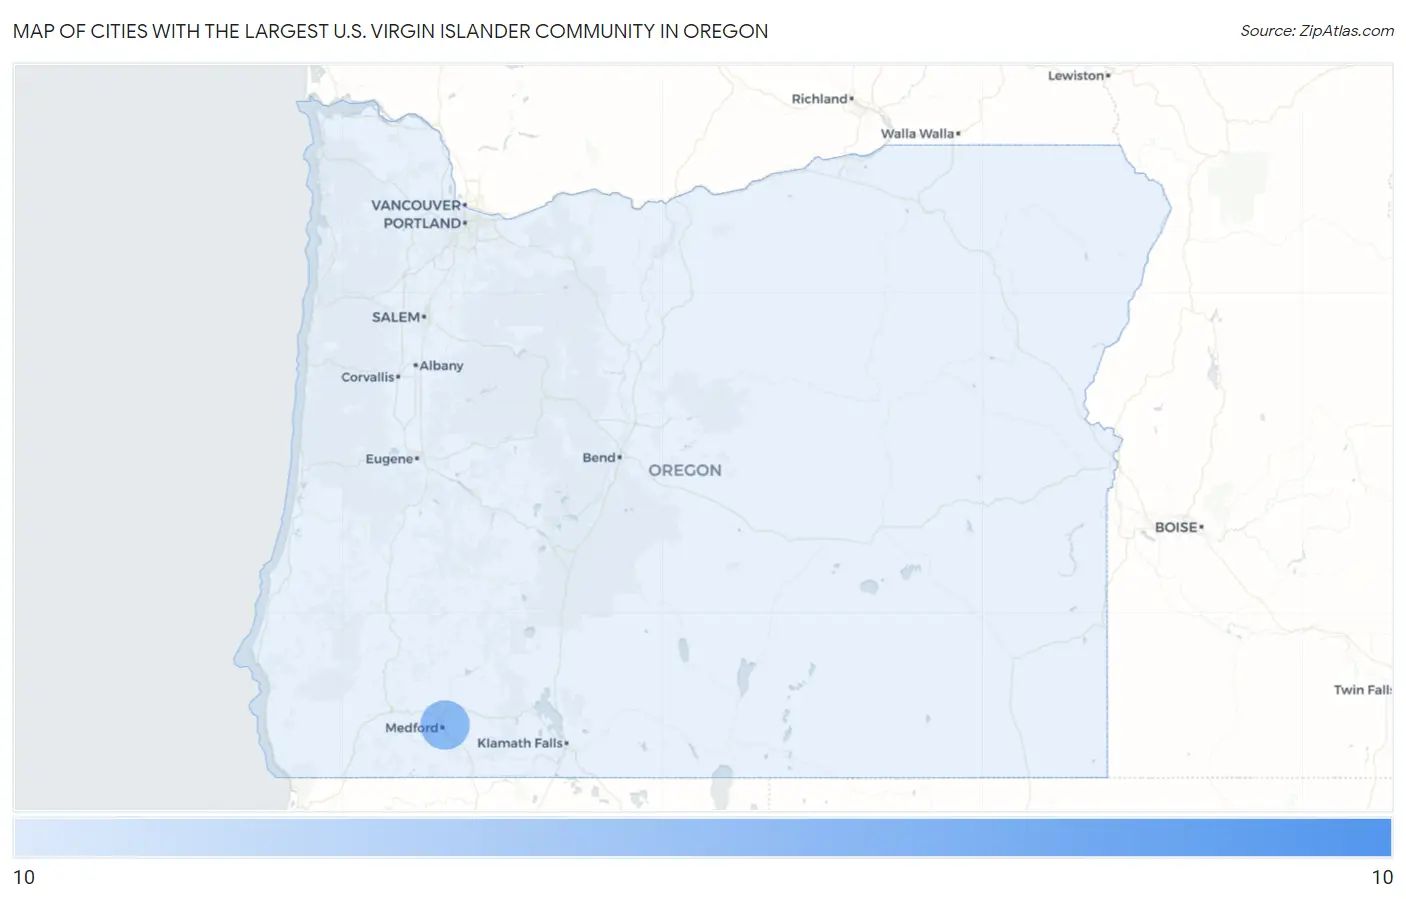 Cities with the Largest U.S. Virgin Islander Community in Oregon Map